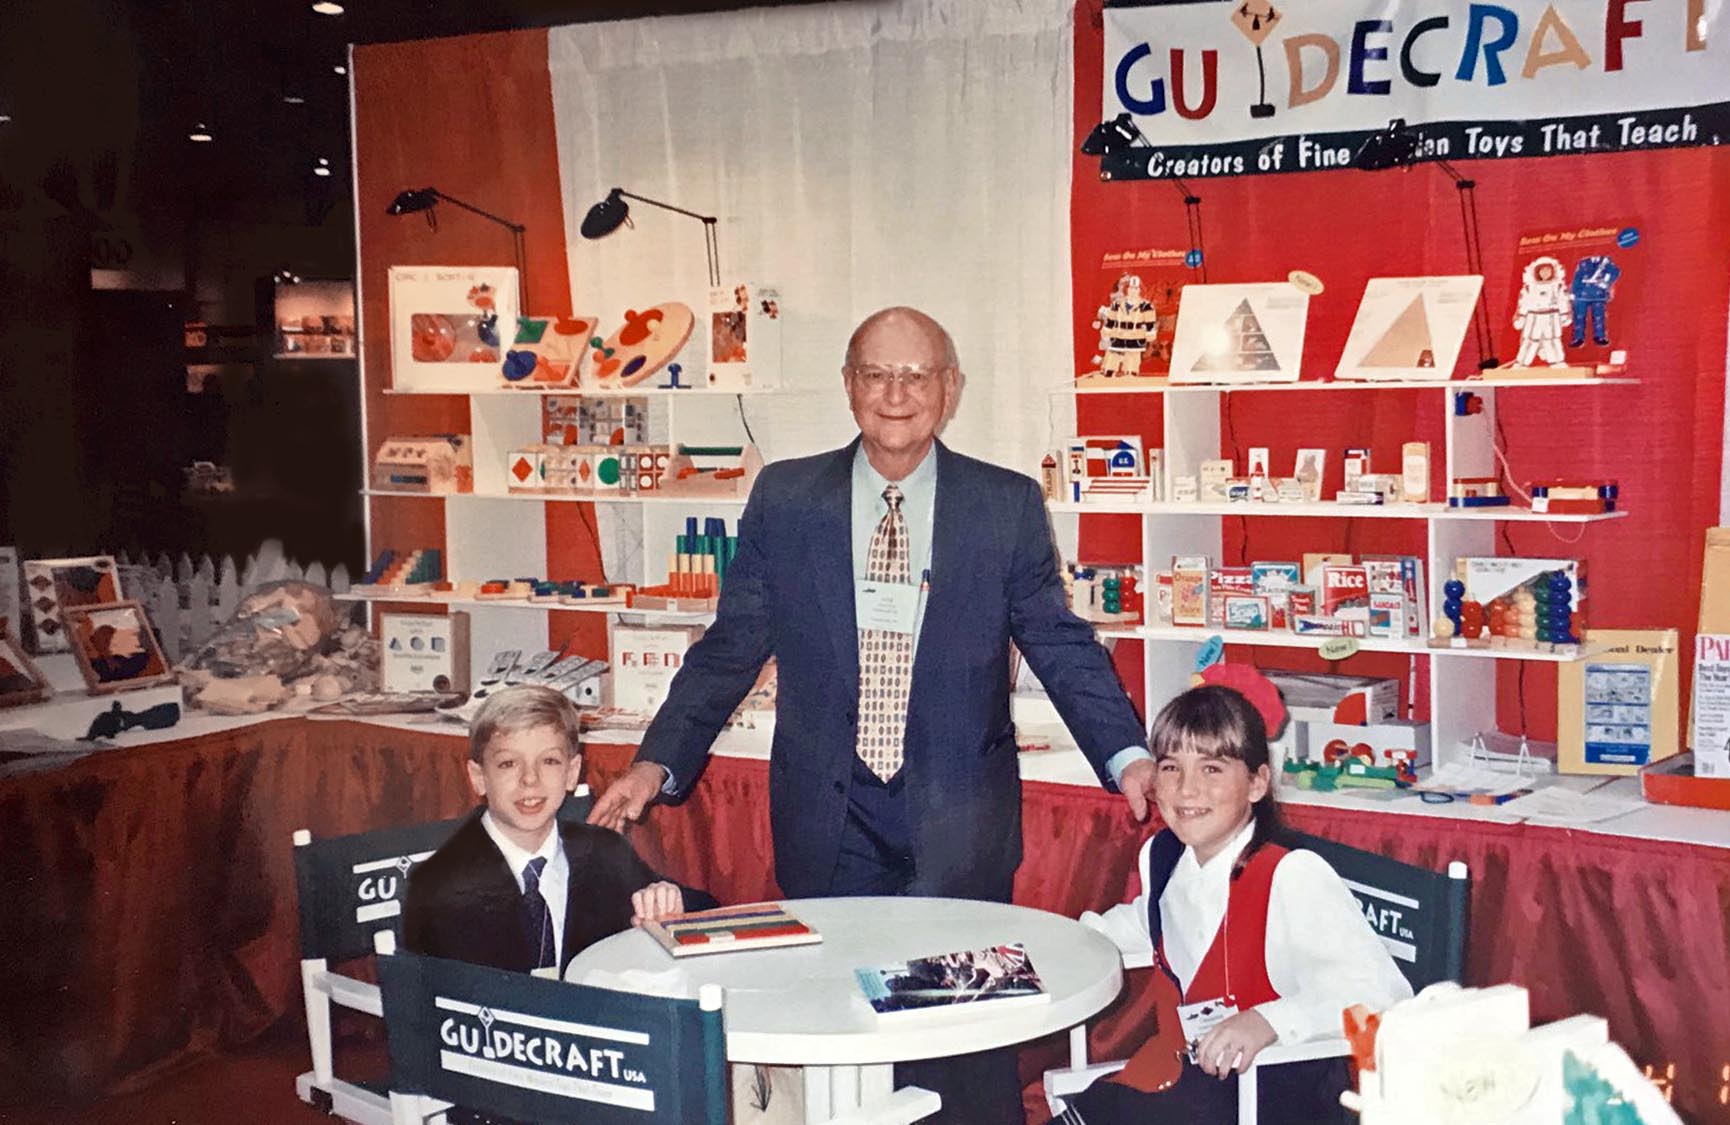 Image of Guidecraft founder, the late Fred Fein, at a tradeshow from many years ago showcasing many of the original Guidecraft products and wooden toys.